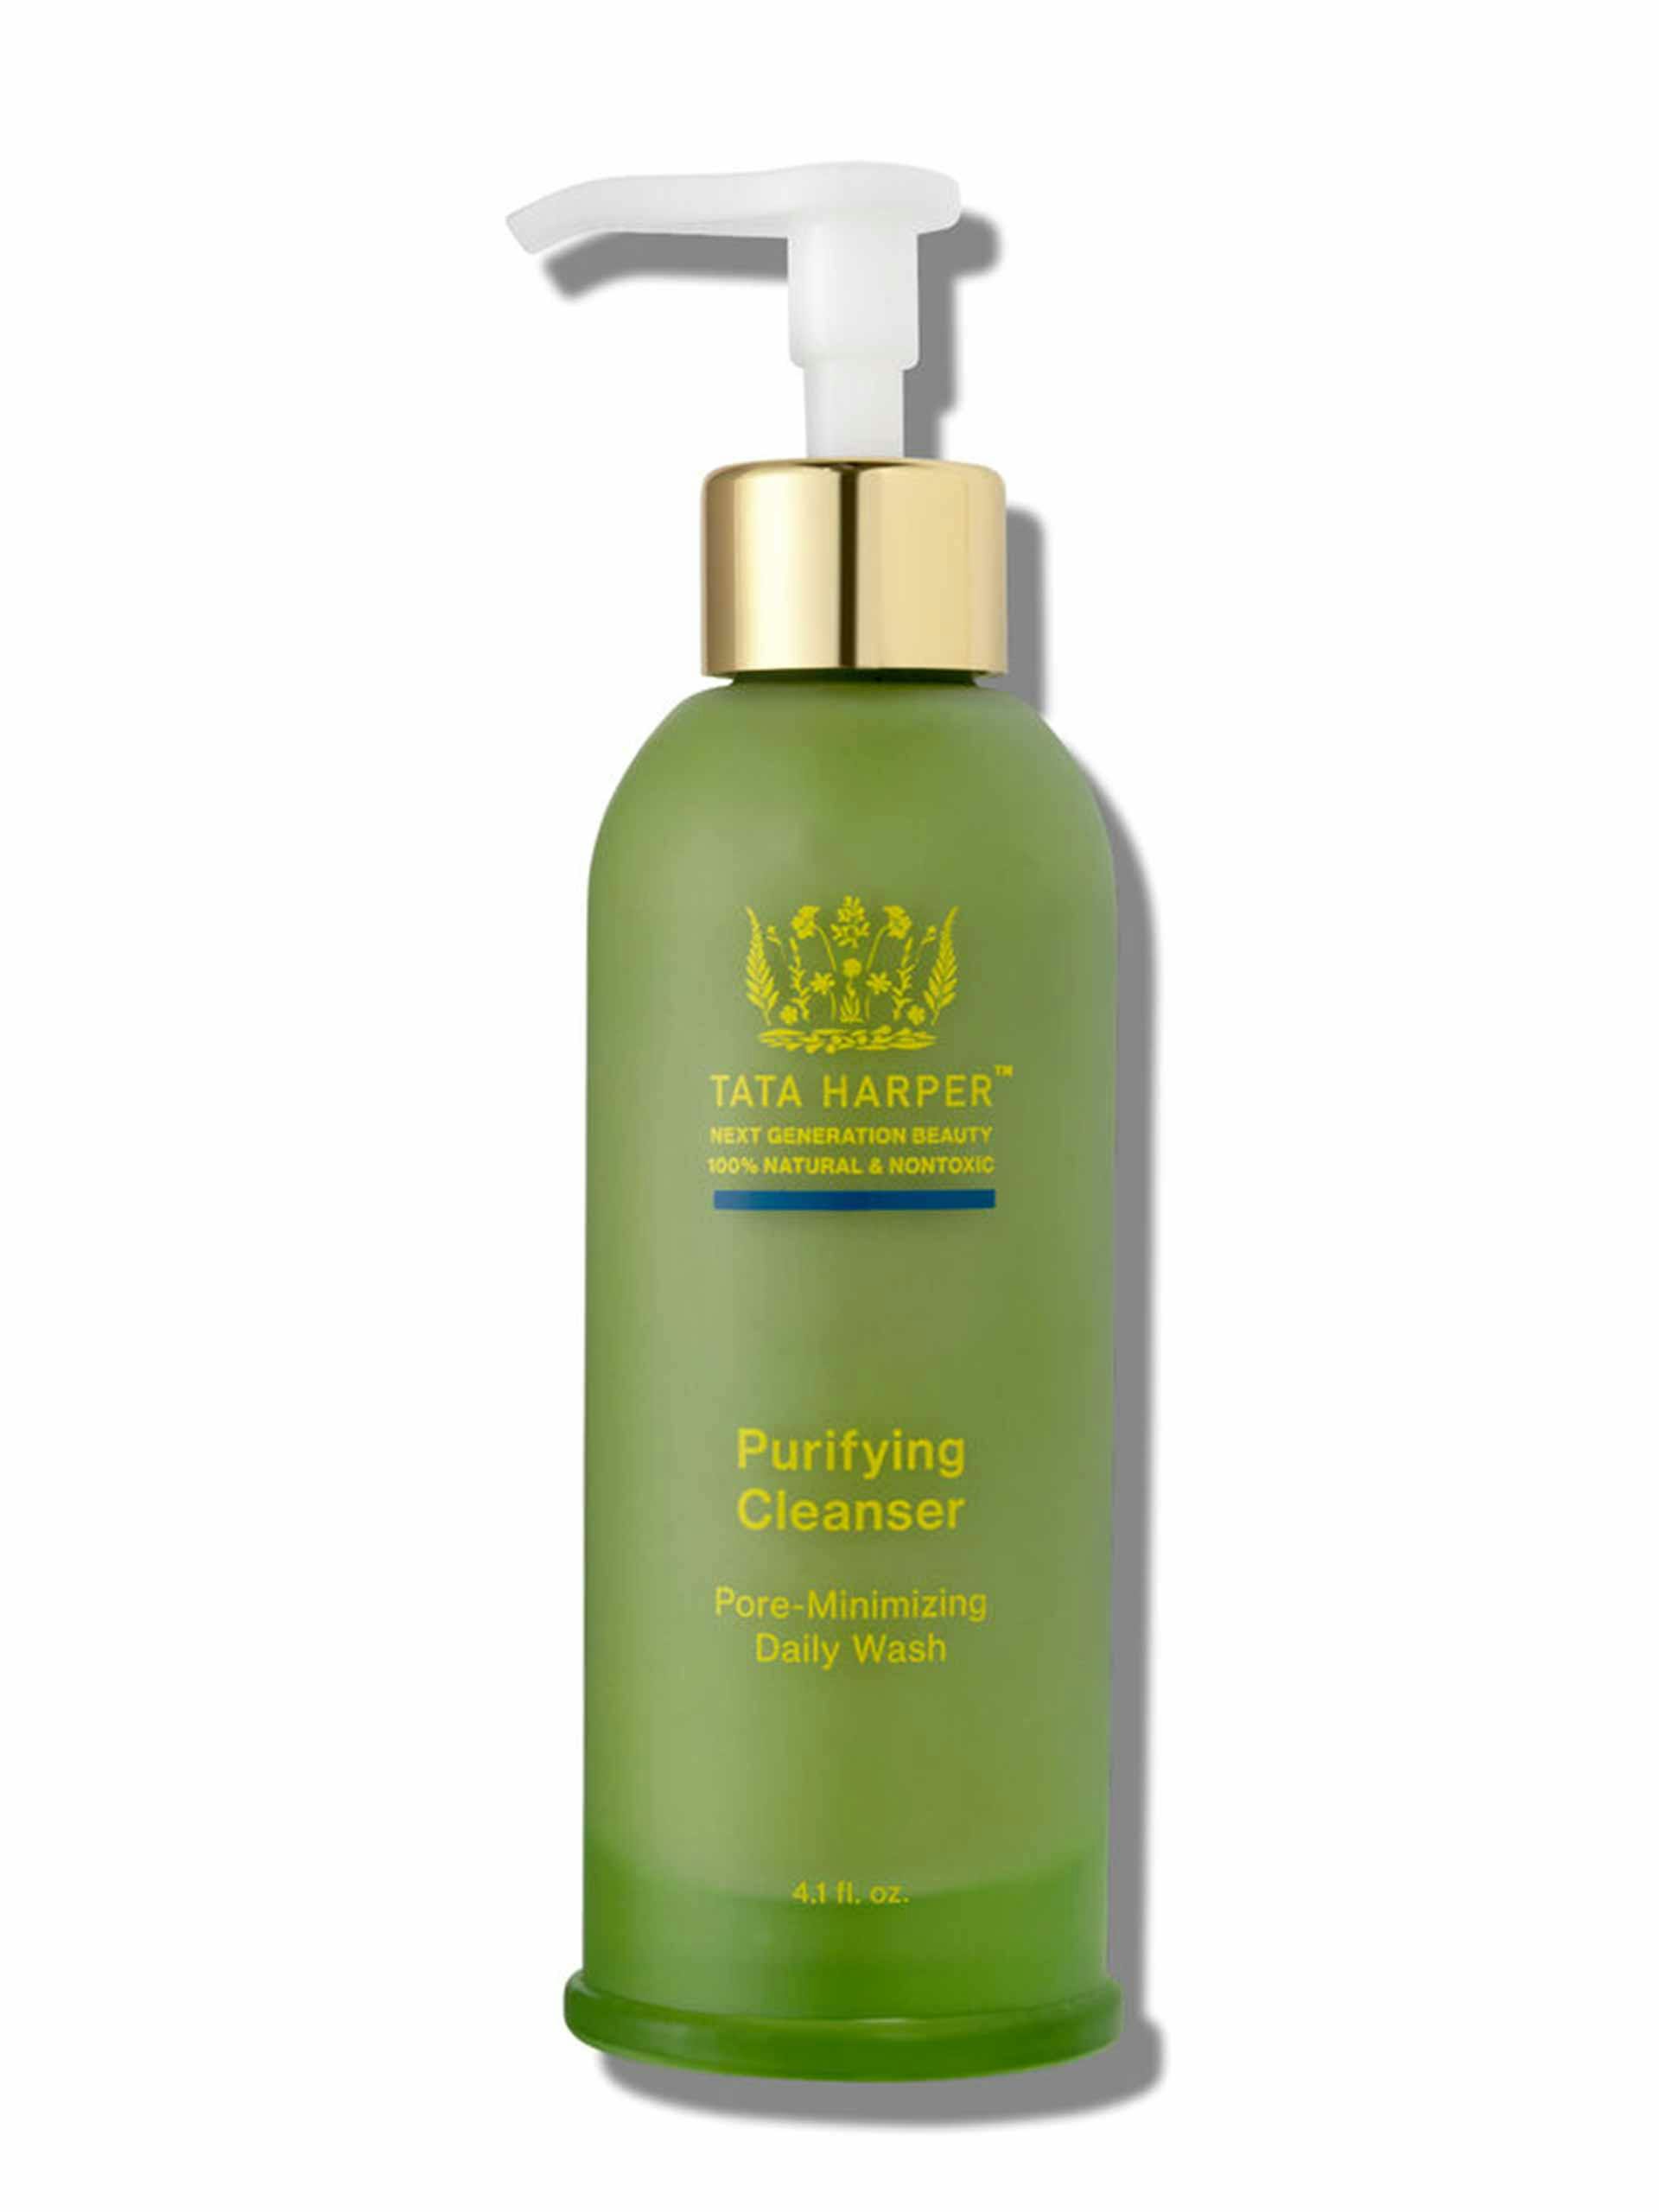 Purifying facial cleanser